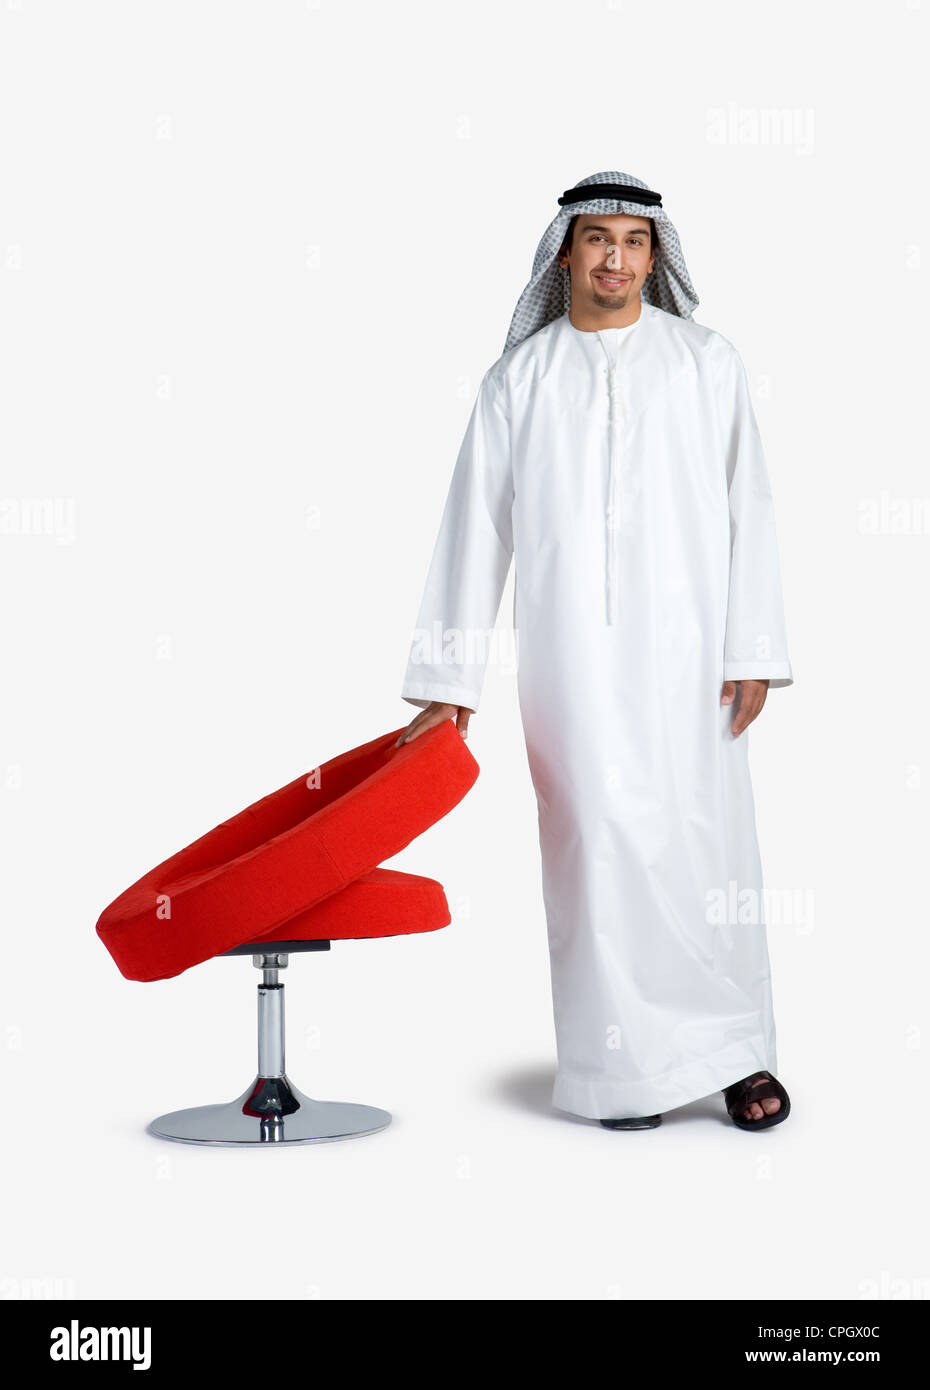 Young man standing near chair, portrait Stock Photo